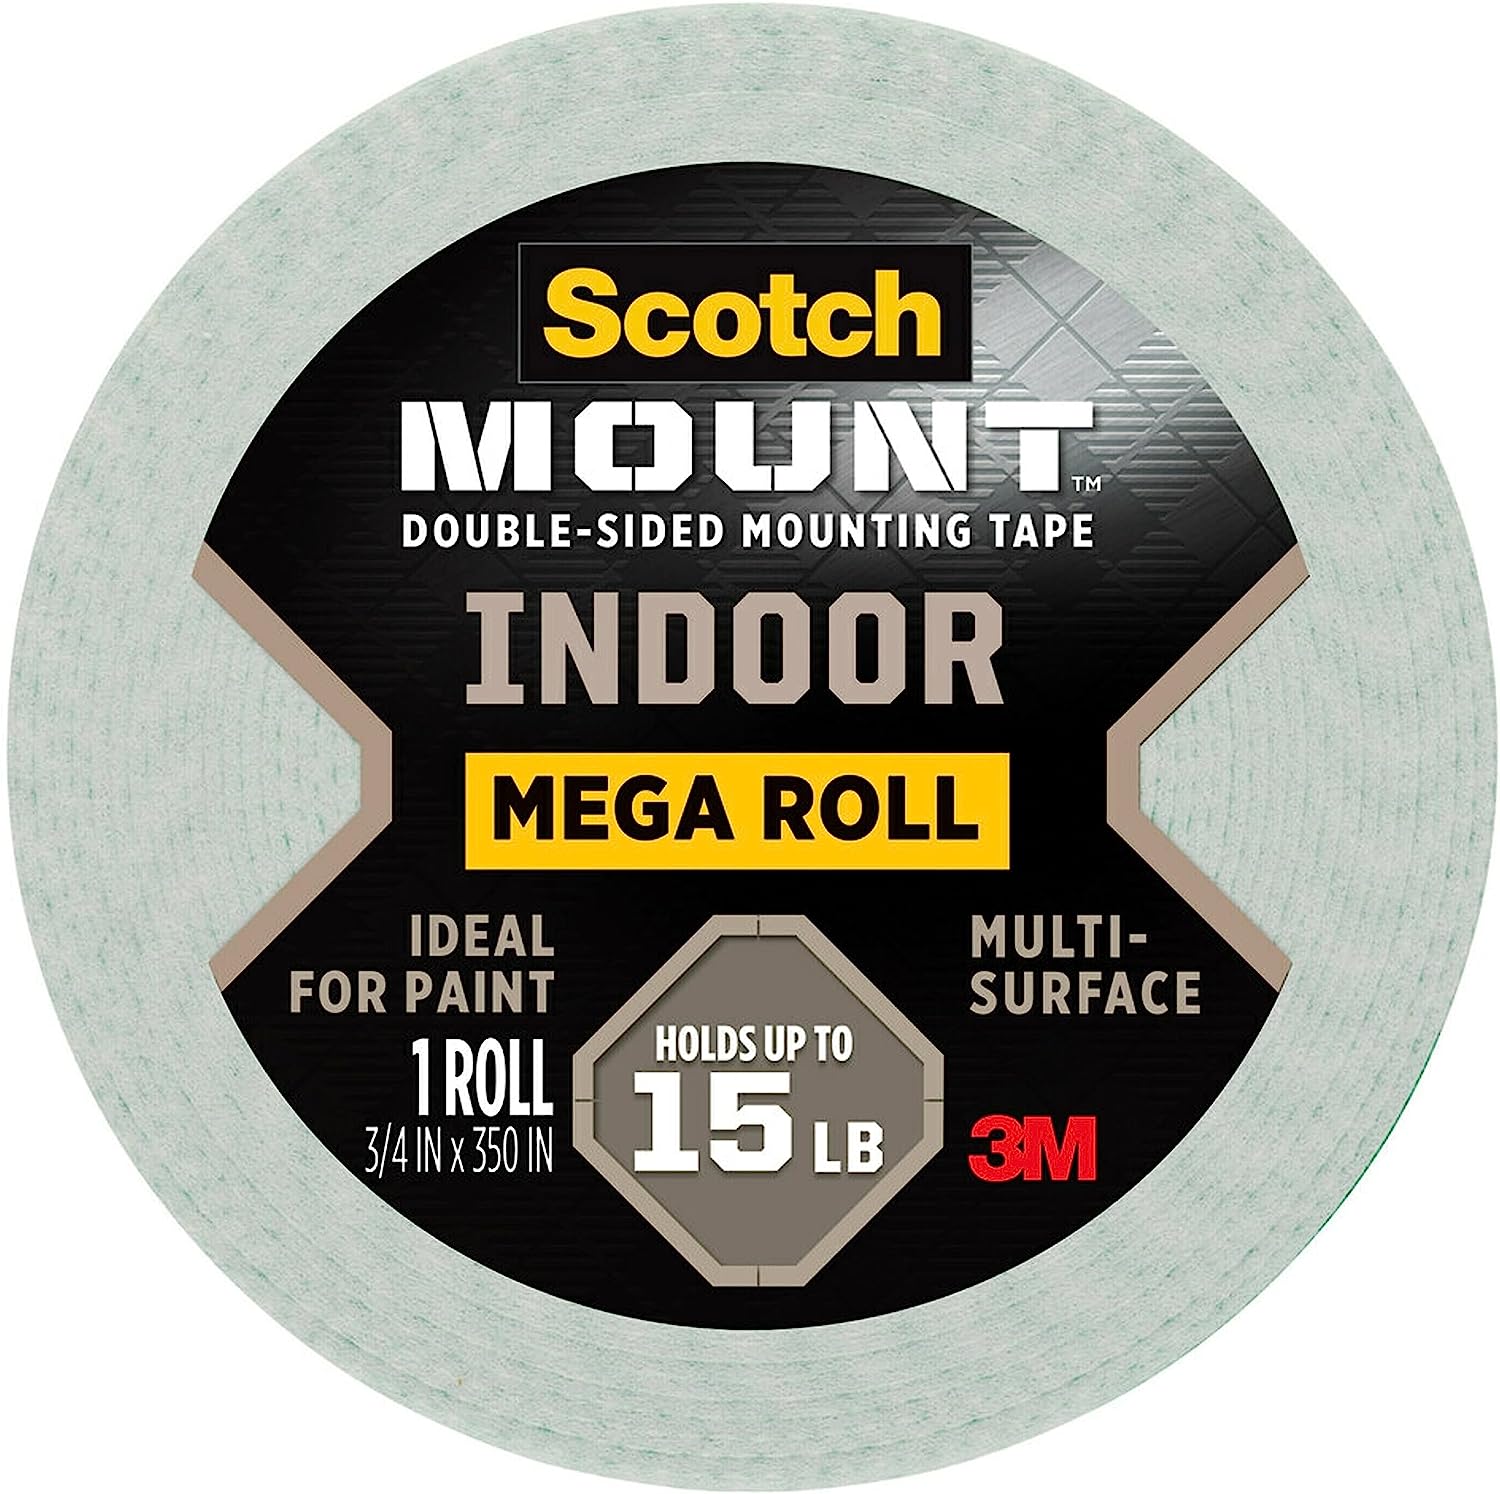 Scotch-Mount Indoor Double-Sided Mounting Tape Mega [...]